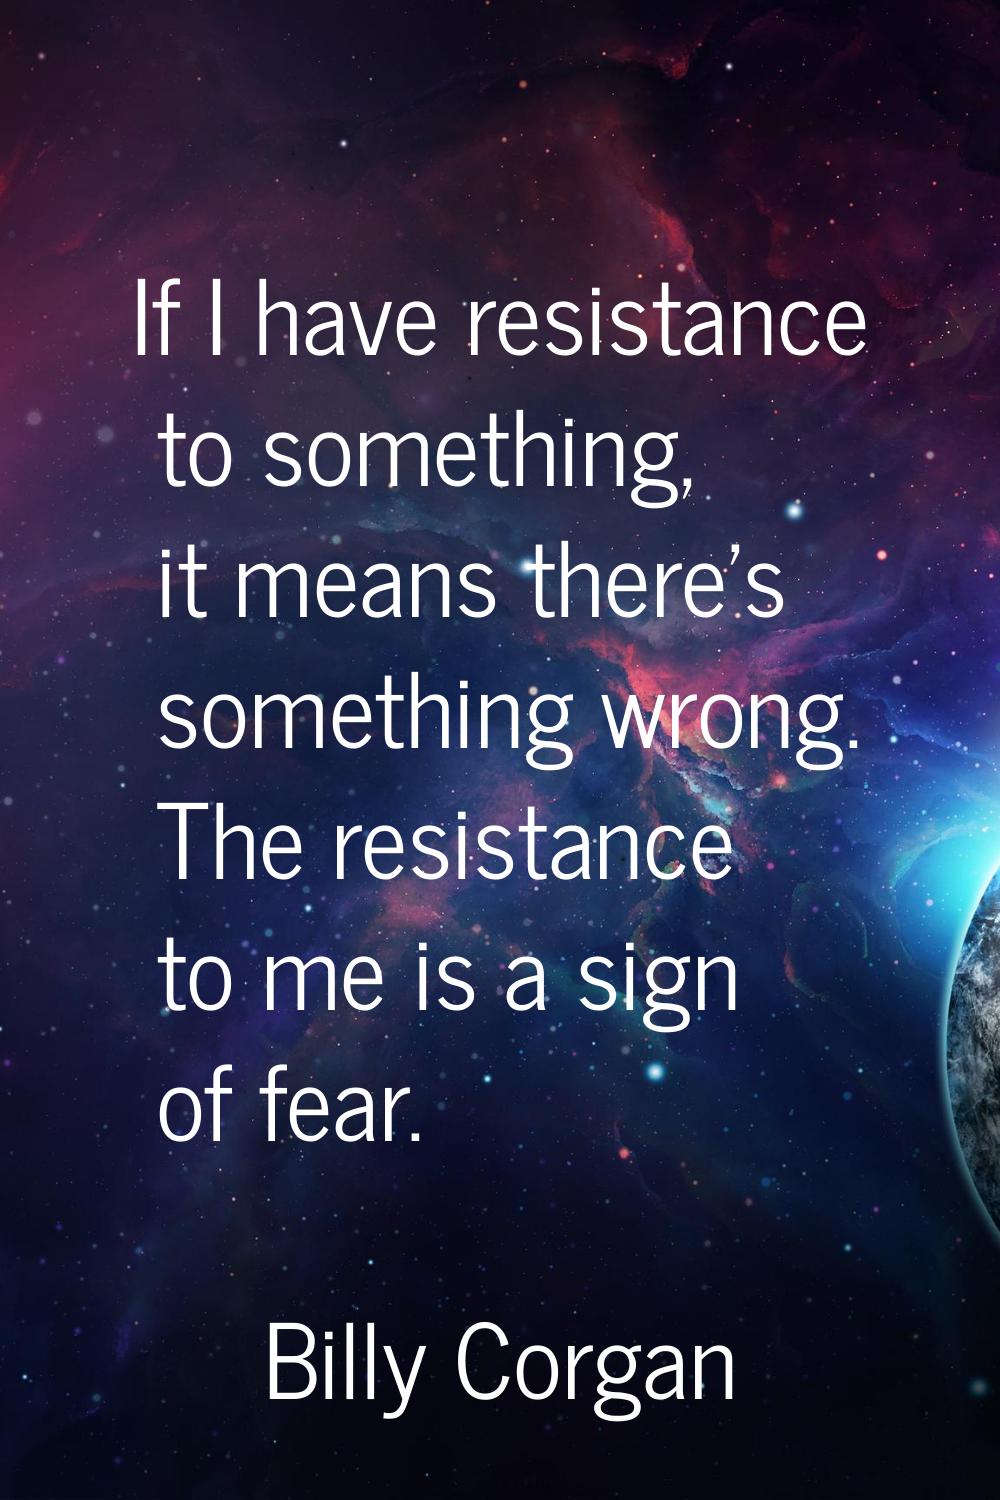 If I have resistance to something, it means there's something wrong. The resistance to me is a sign